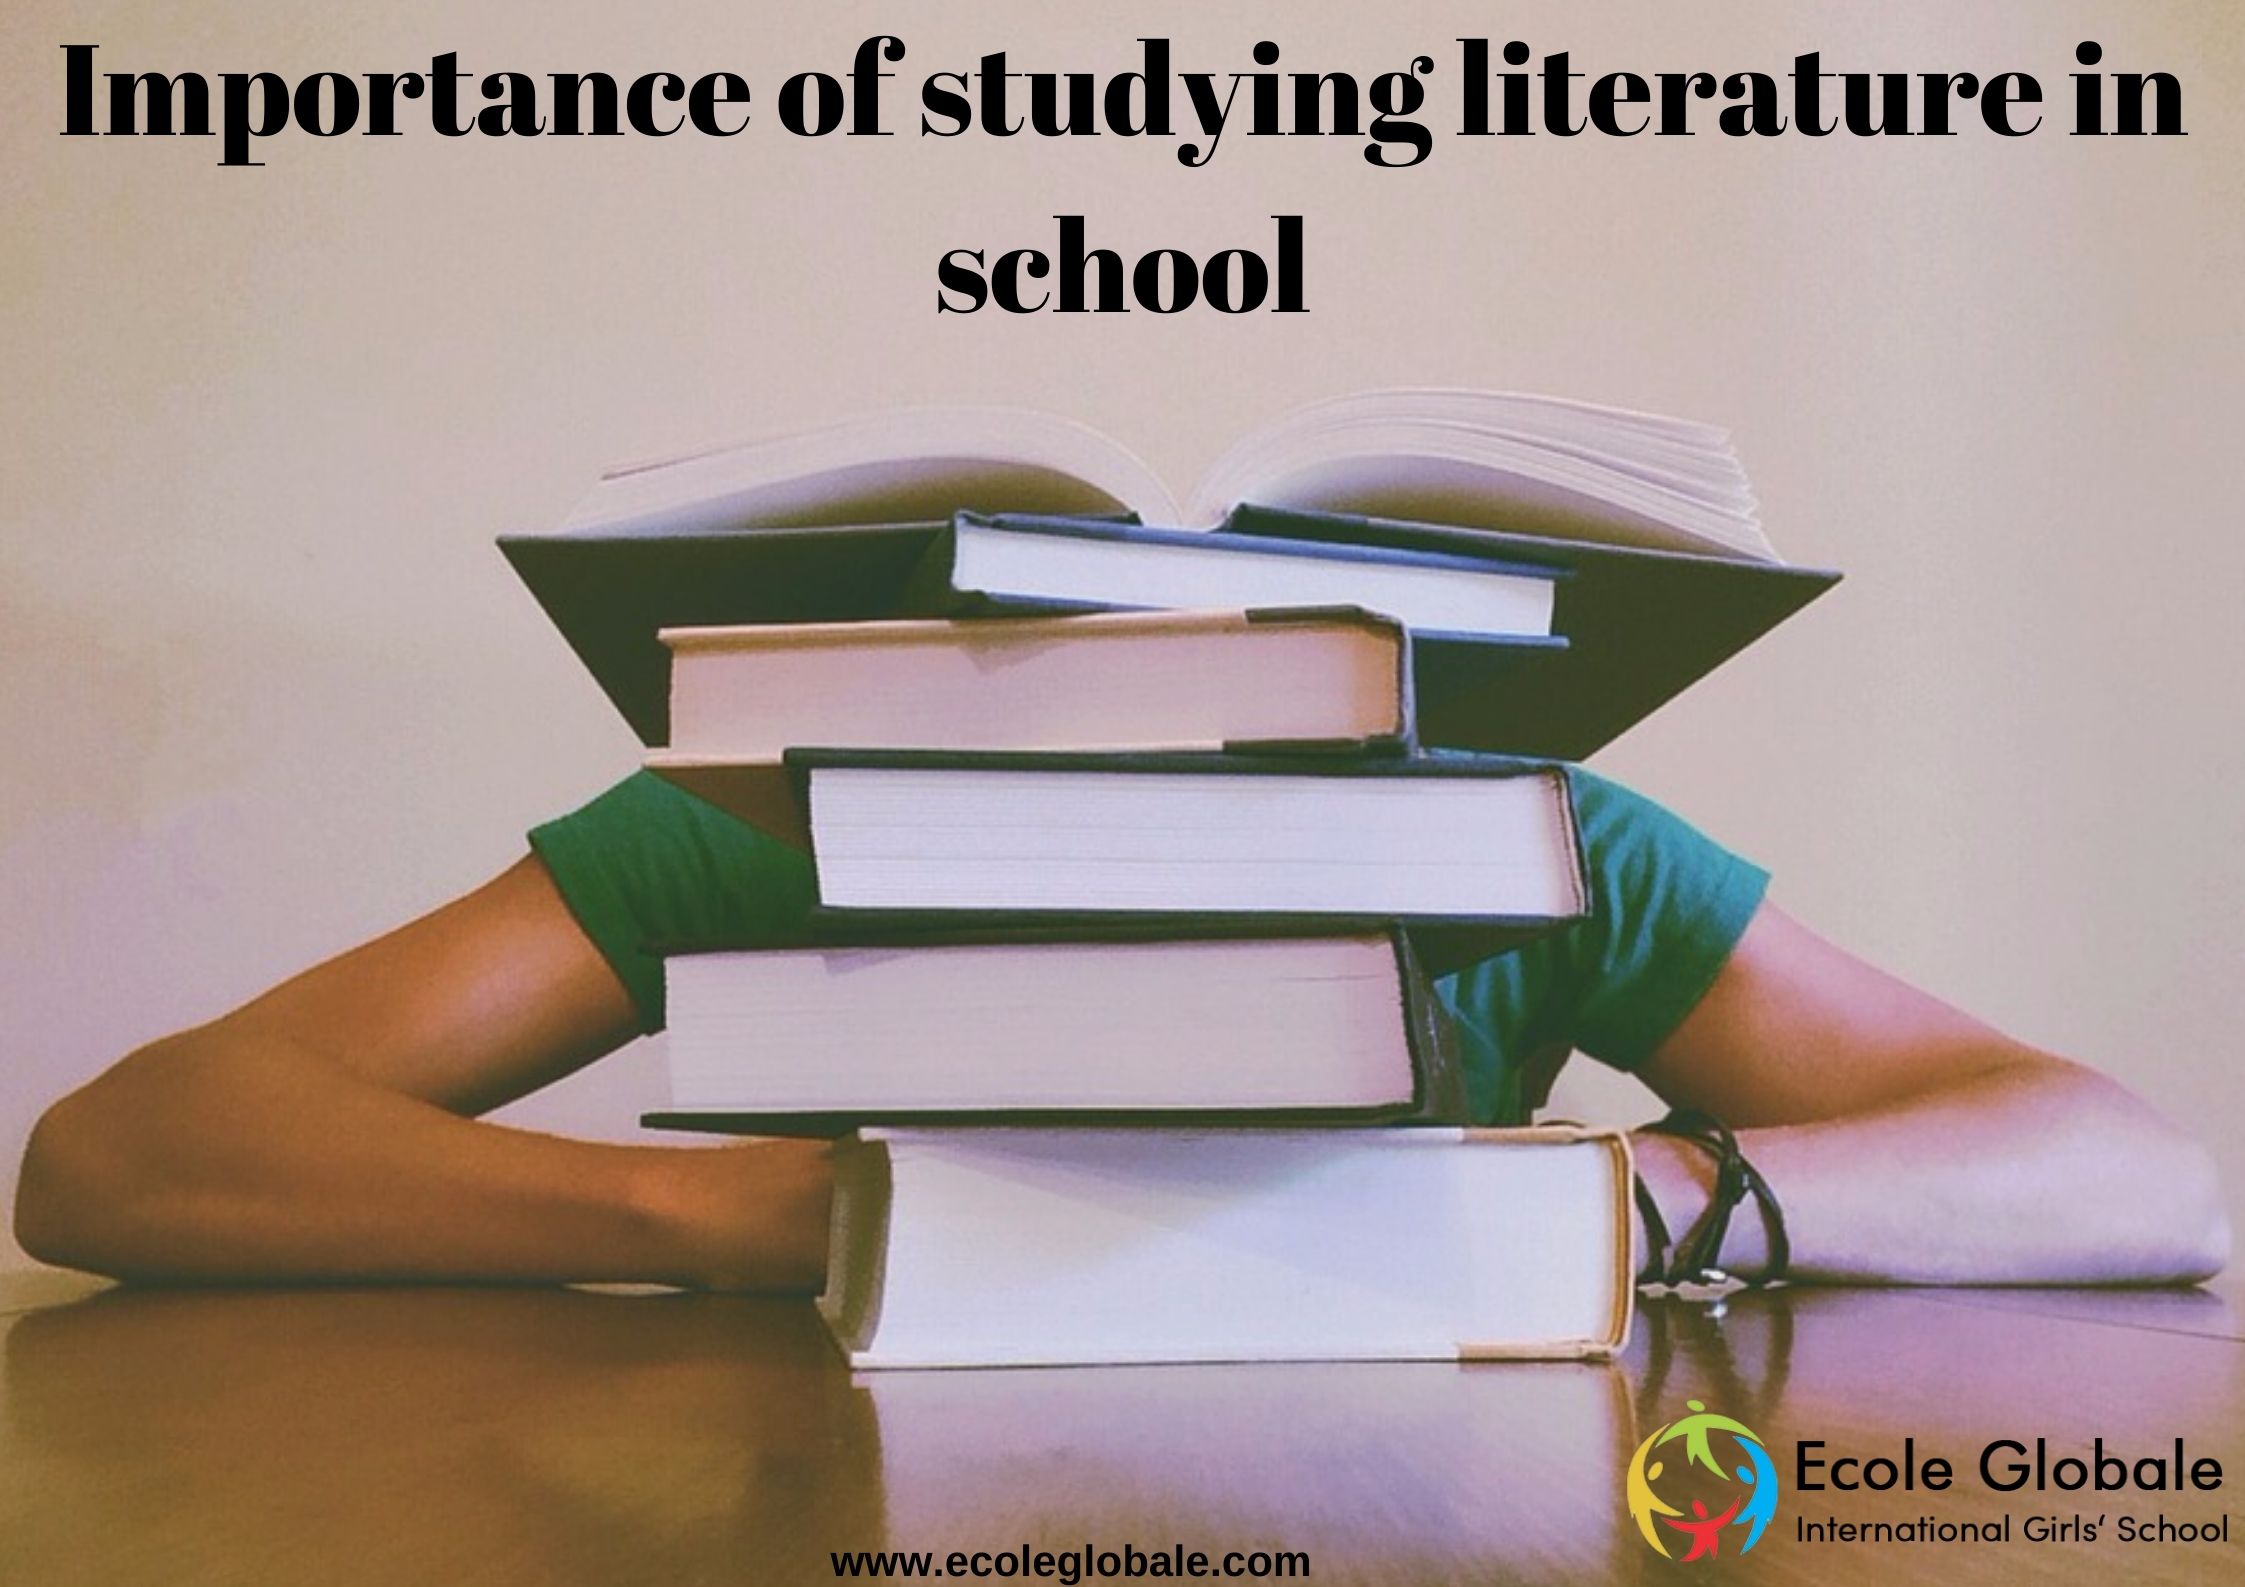 What is the importance of studying literature in school?